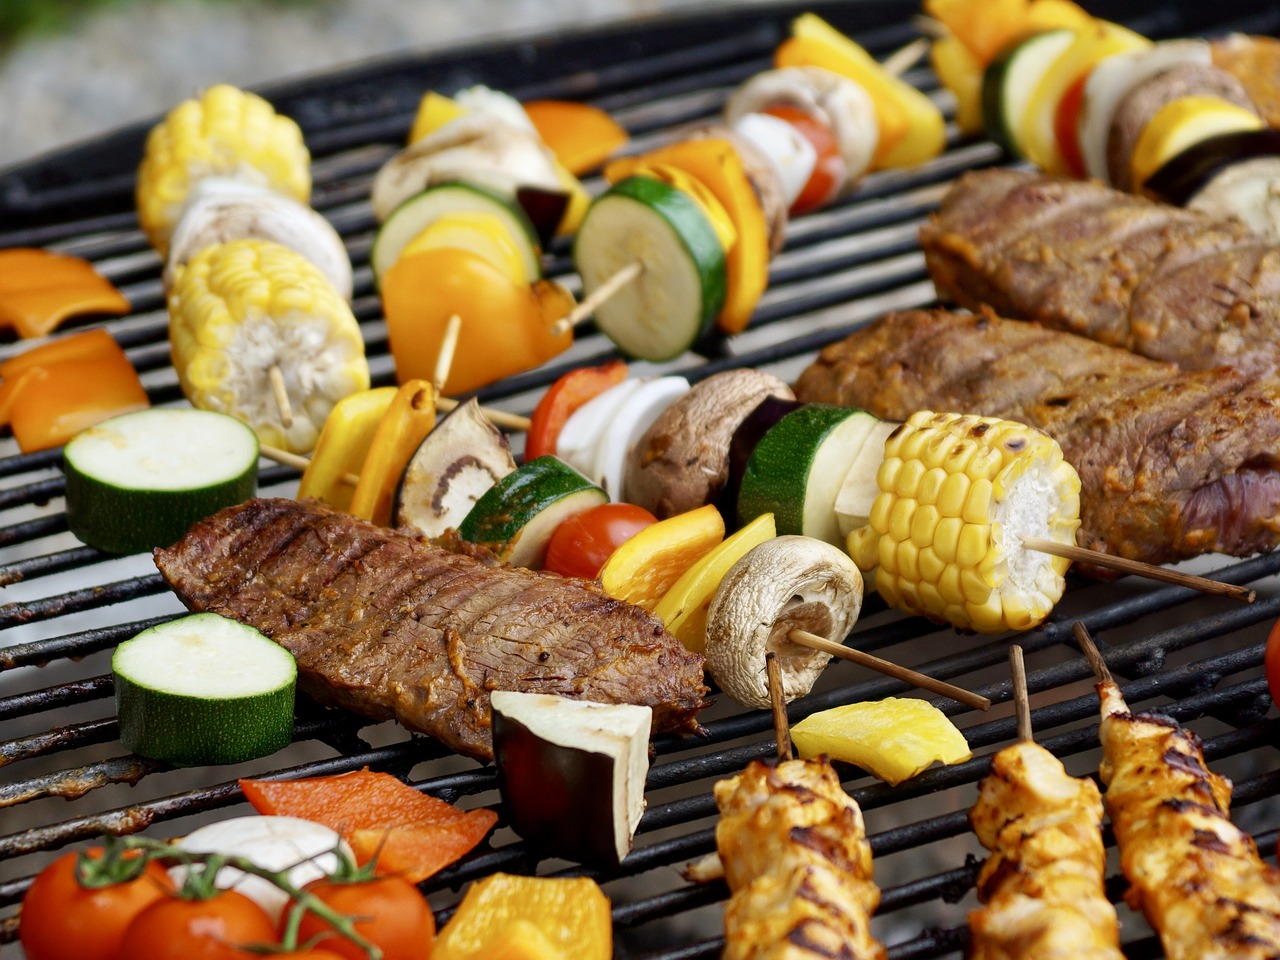 grilling from the tablegrill grilled meats free photo